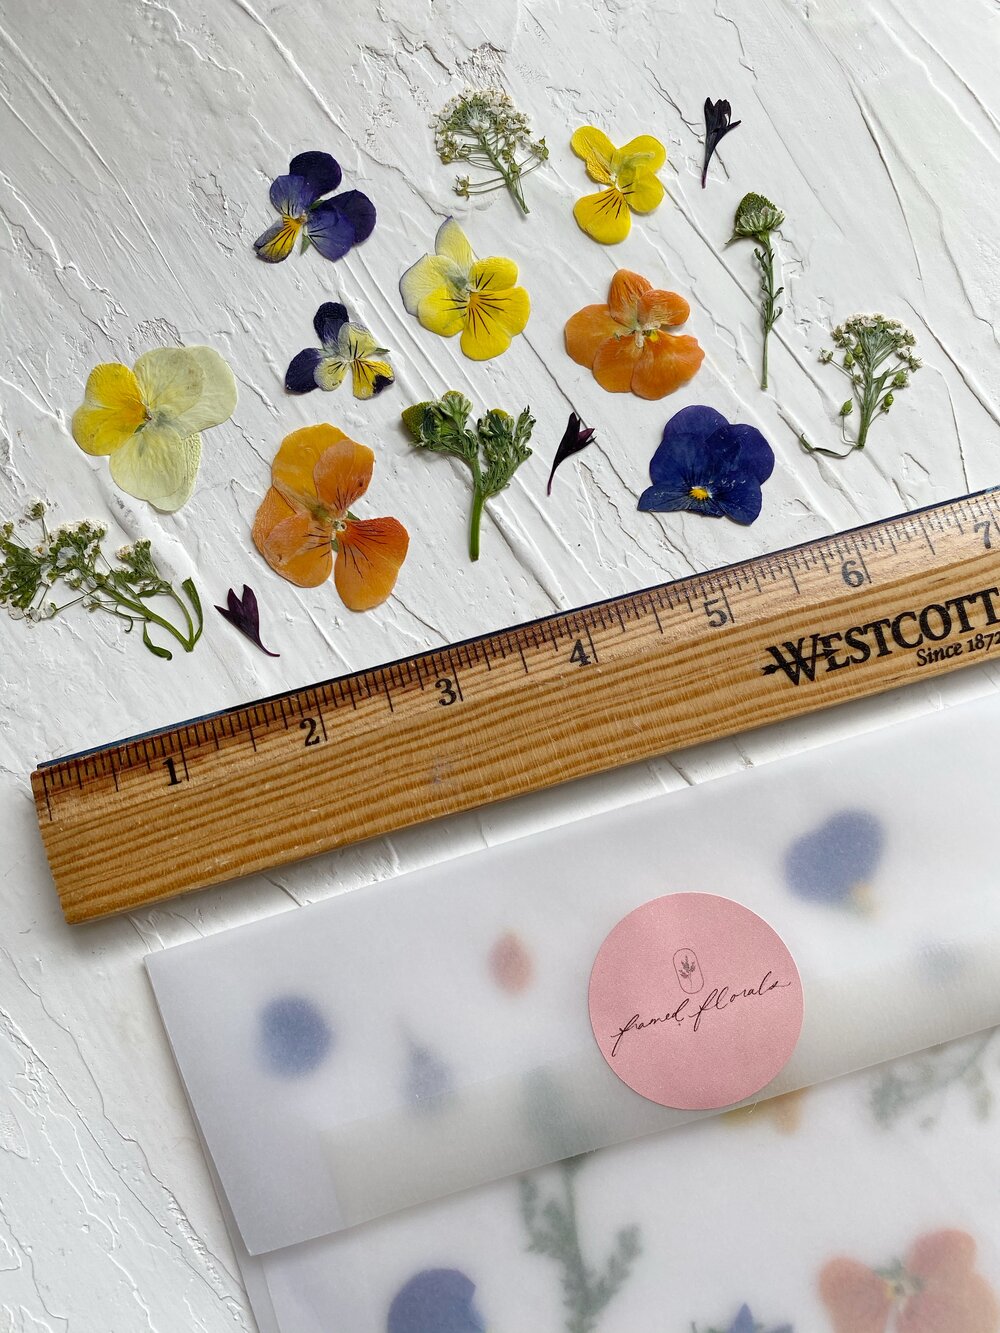 Shop  Edible Flowers, Pressed Edible Flowers, and Botanical Products  Magnolia's Yarden